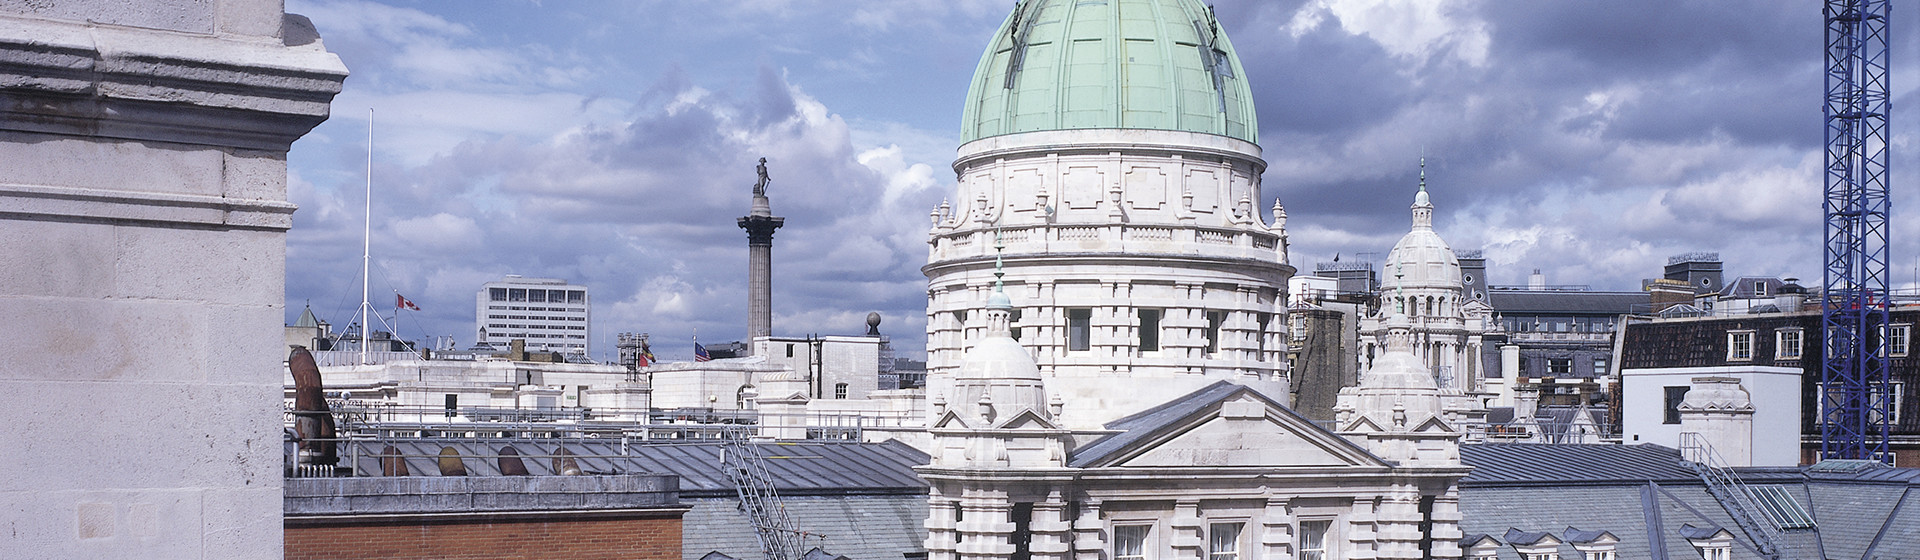 Image for Foreign & Commonwealth Office Roof